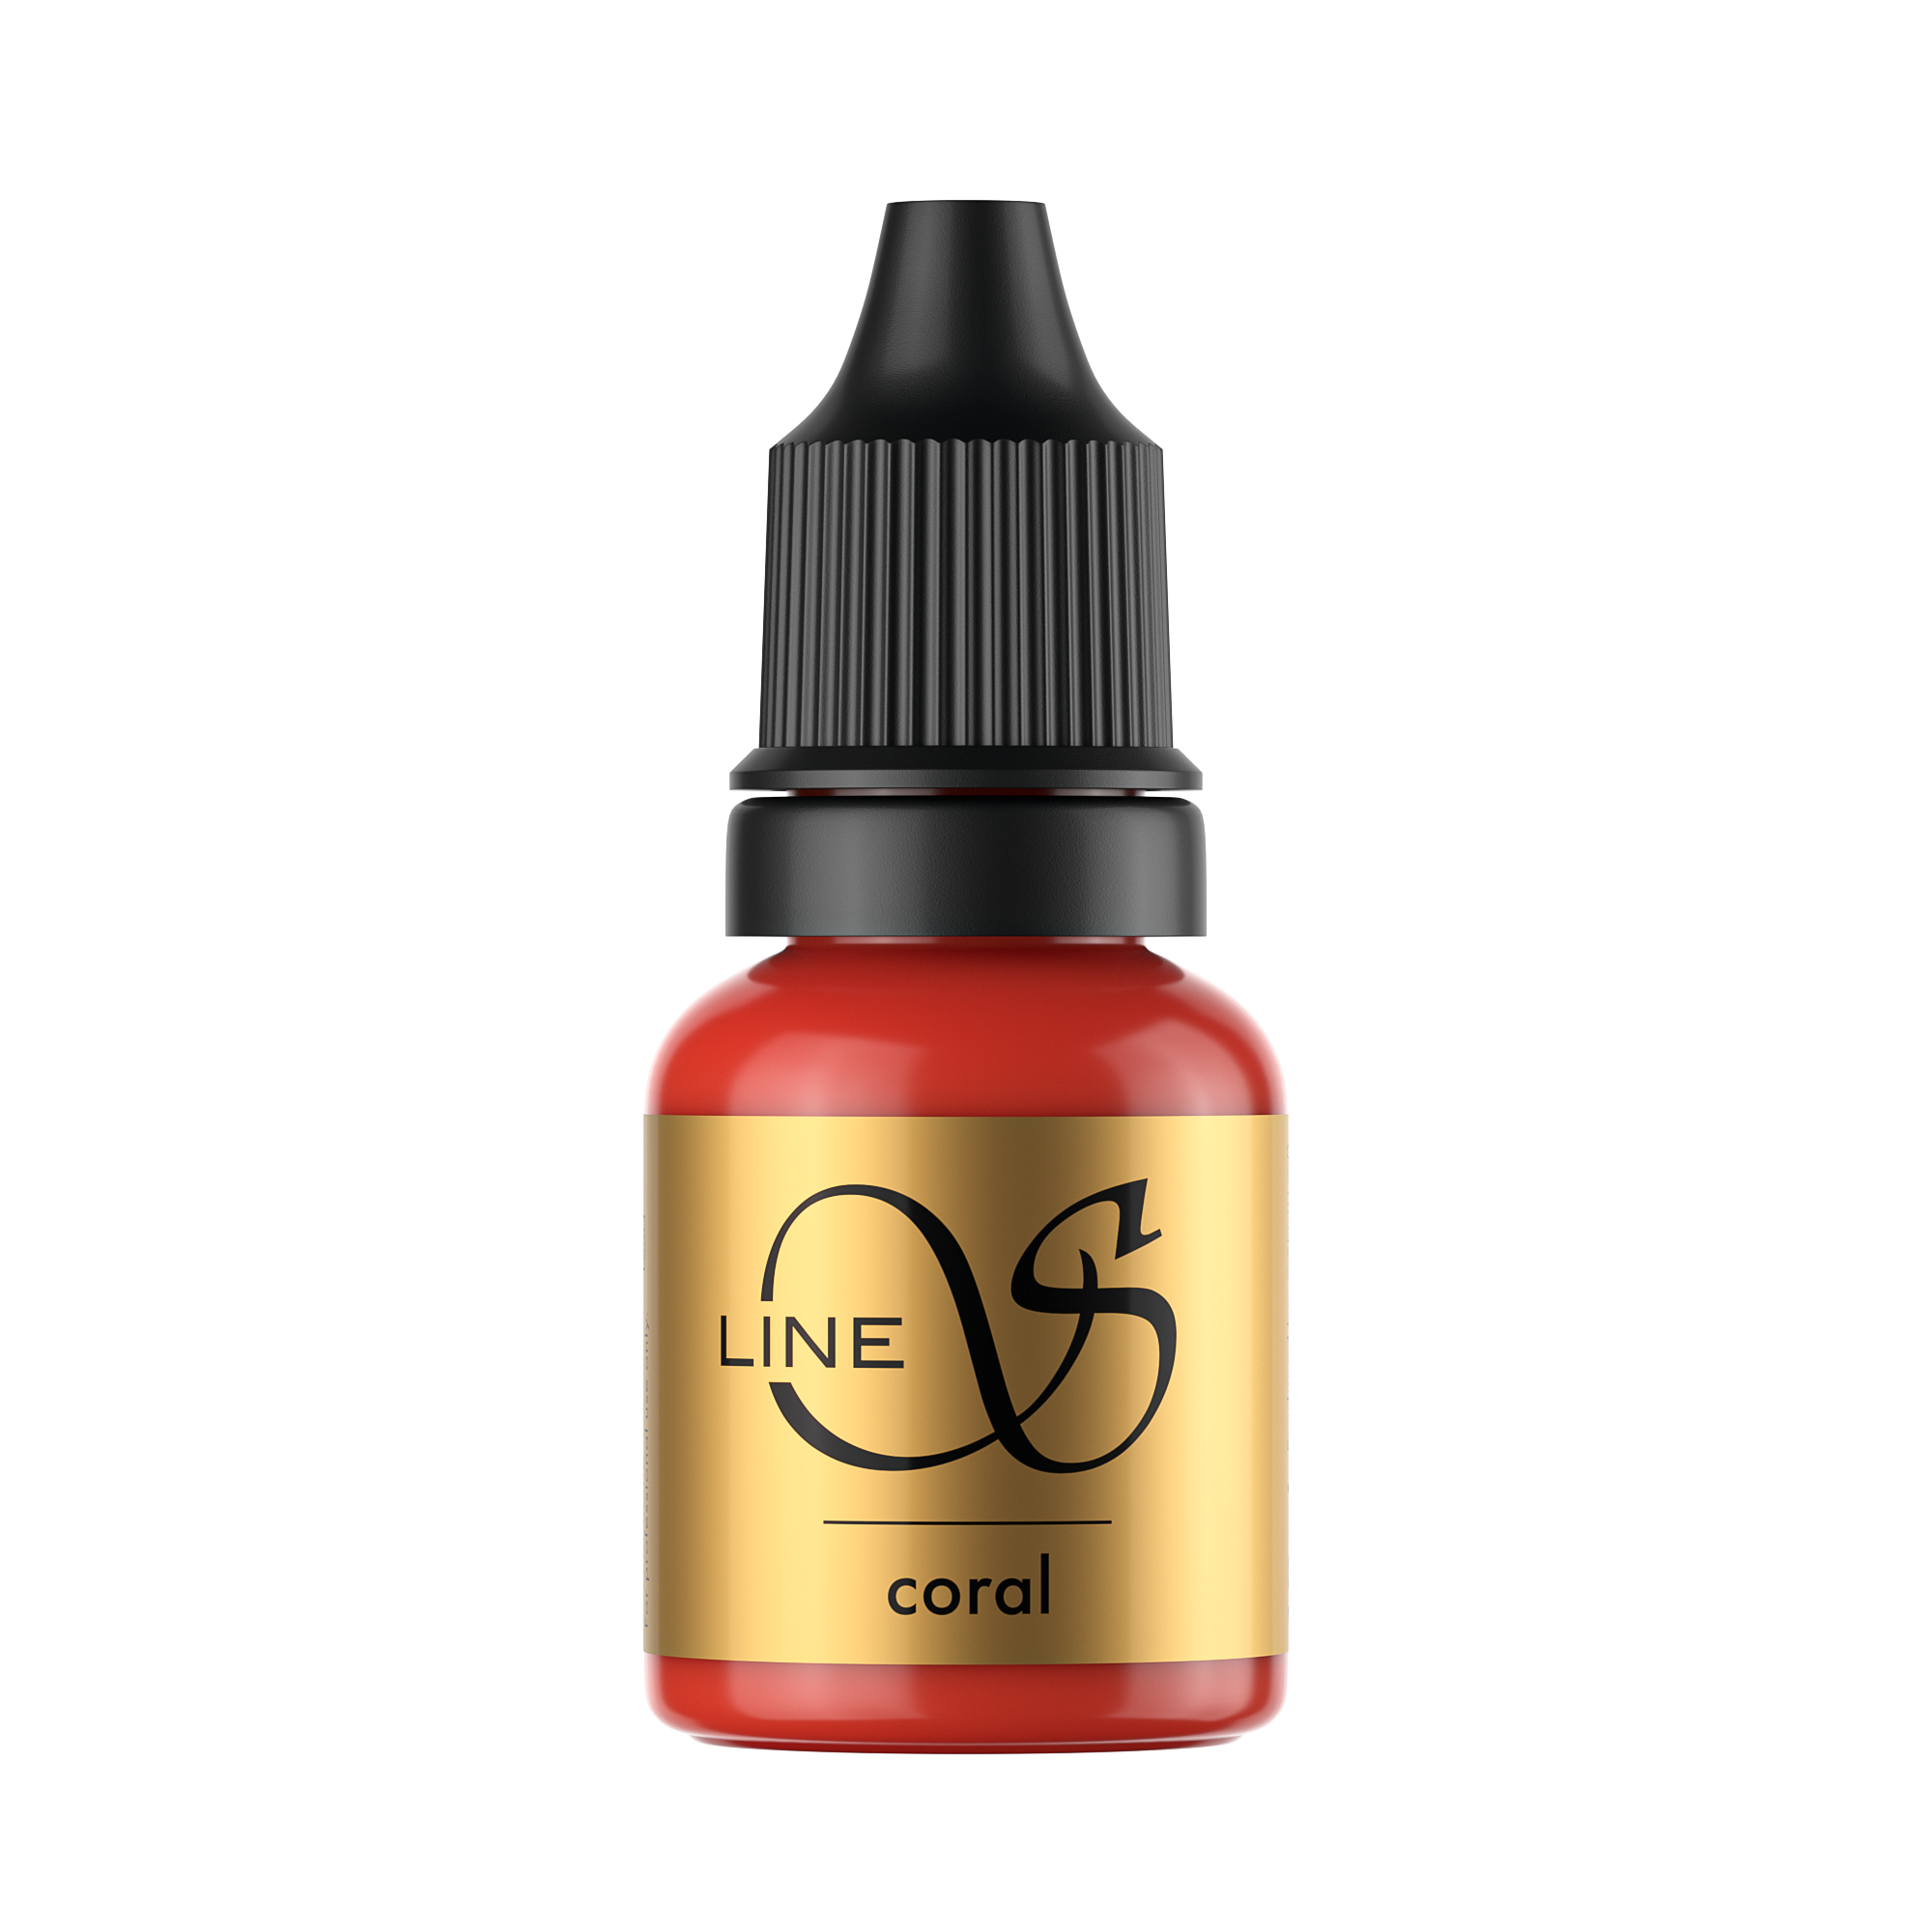 LineS coral 10ml